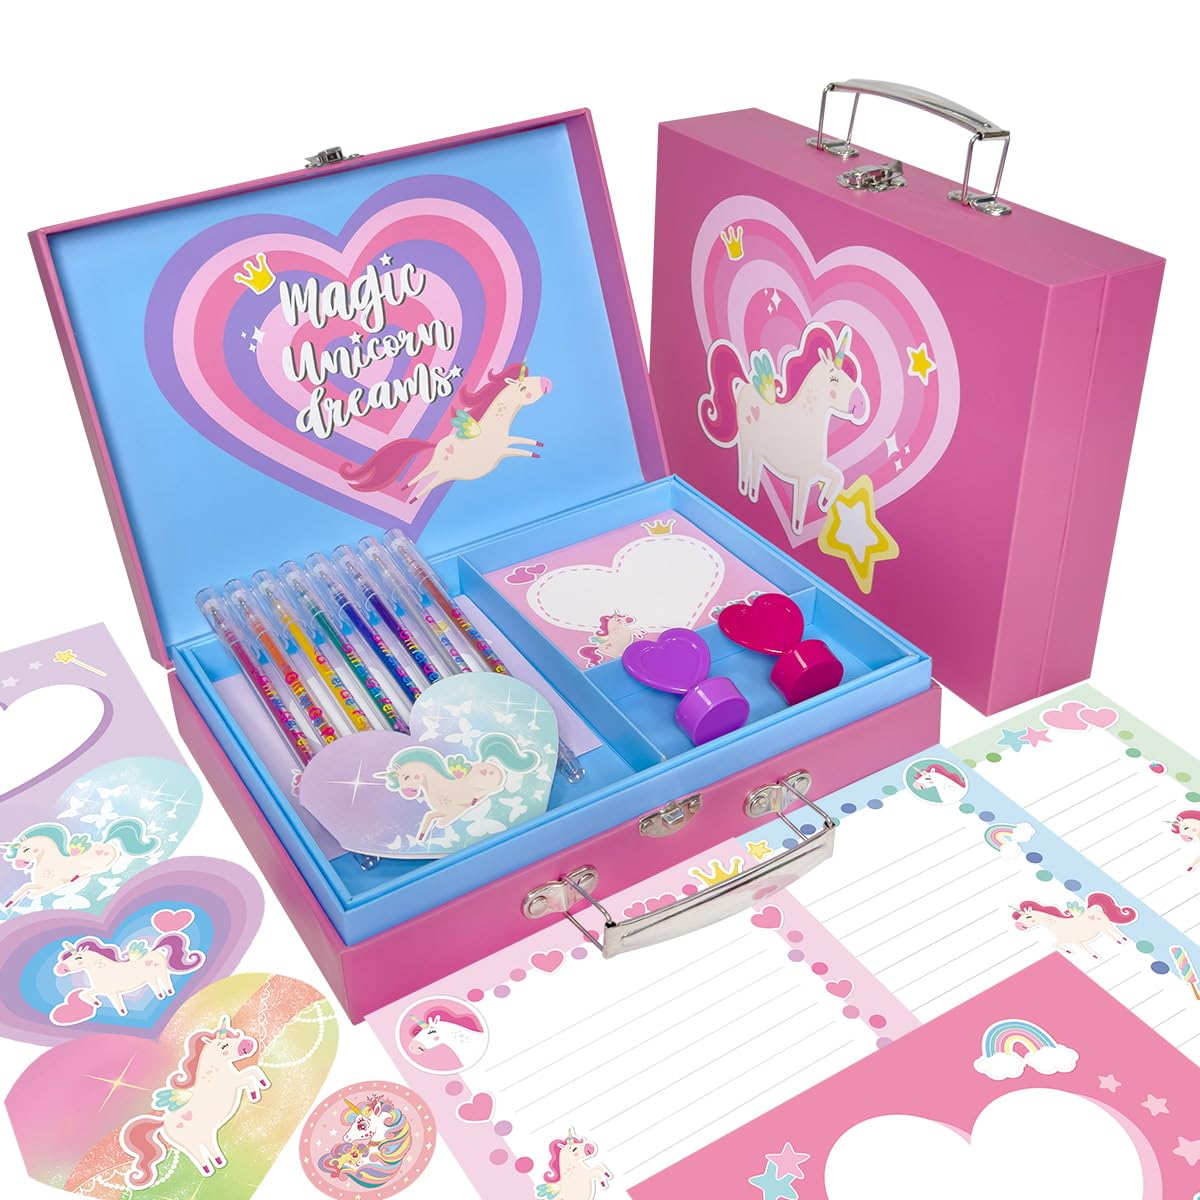 Unicorn Stationary Set - 98Pcs Kids Stationery Kit for Girls Ages  6,7,8,9,10-12 Years Old, Letter Writing Kit with Envelopes, Paper, Cards,  Girls Toys